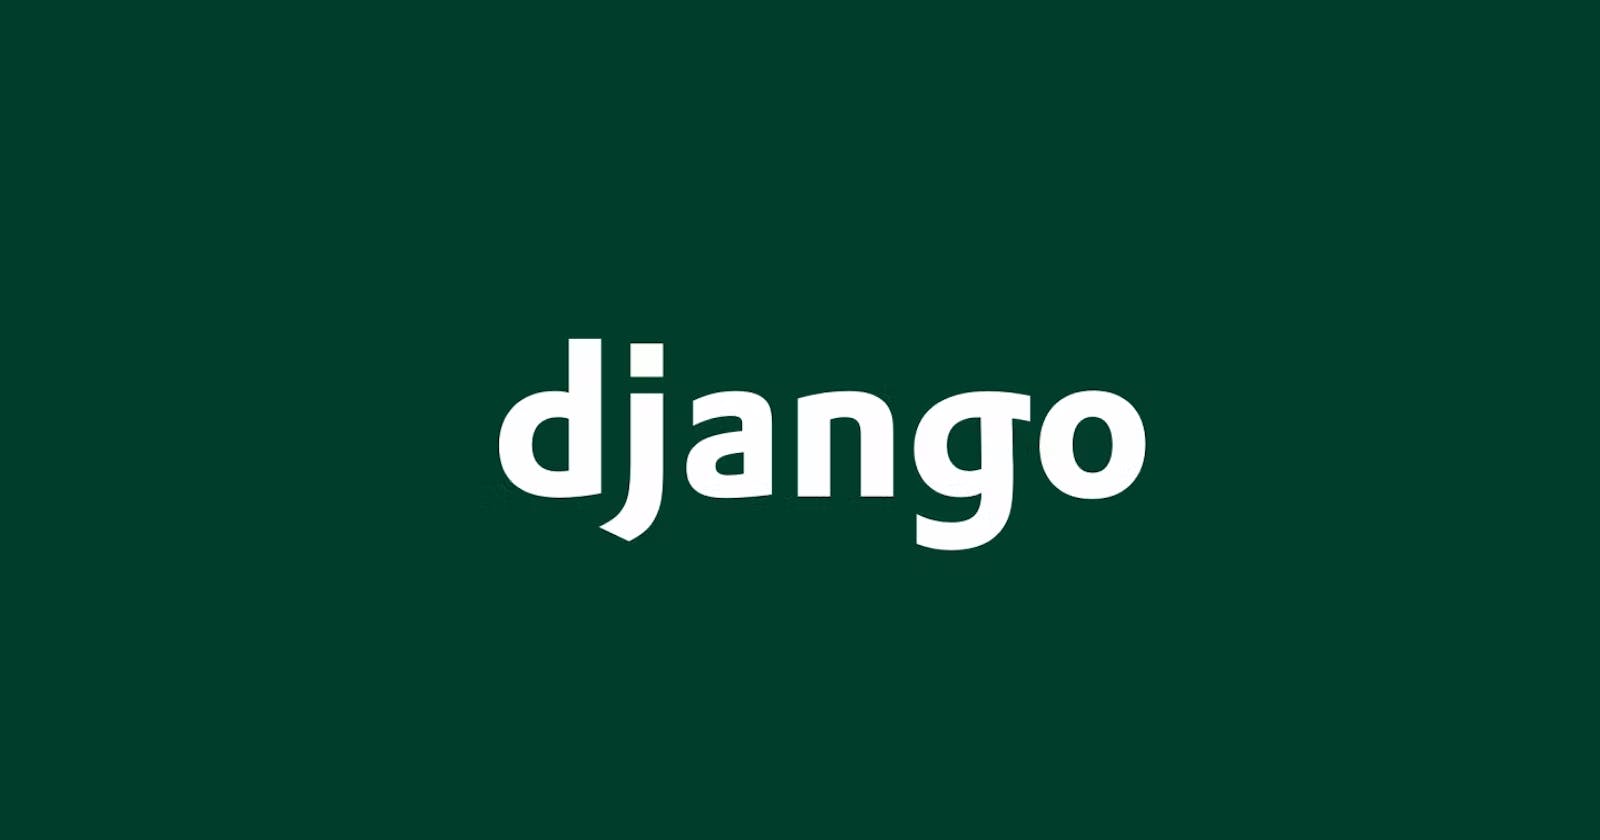 Getting started with Django App